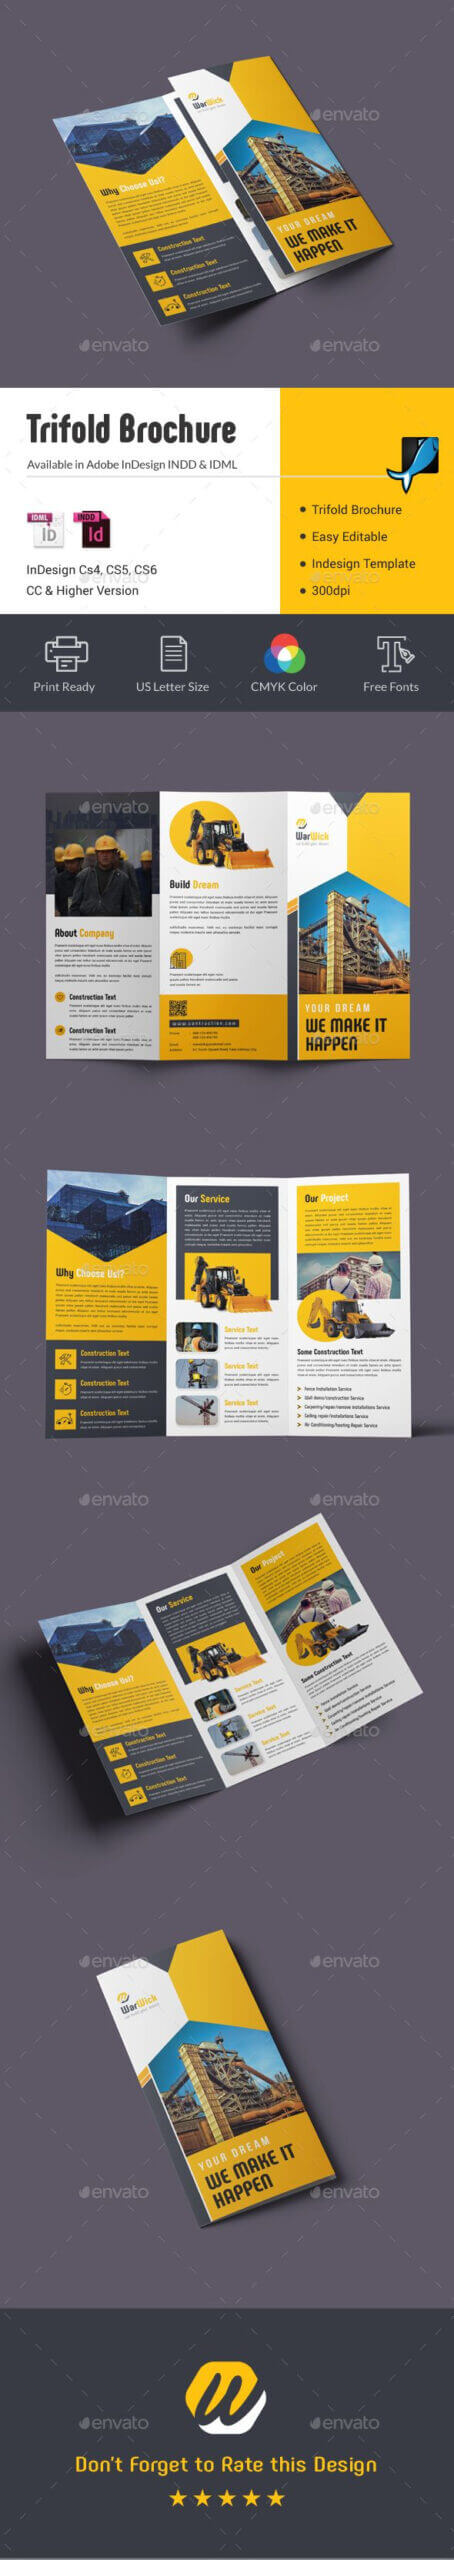 017 Template Ideas Tri Fold Brochure Awesome Indd Layout In Tri Fold Brochure Template Indesign Free Download